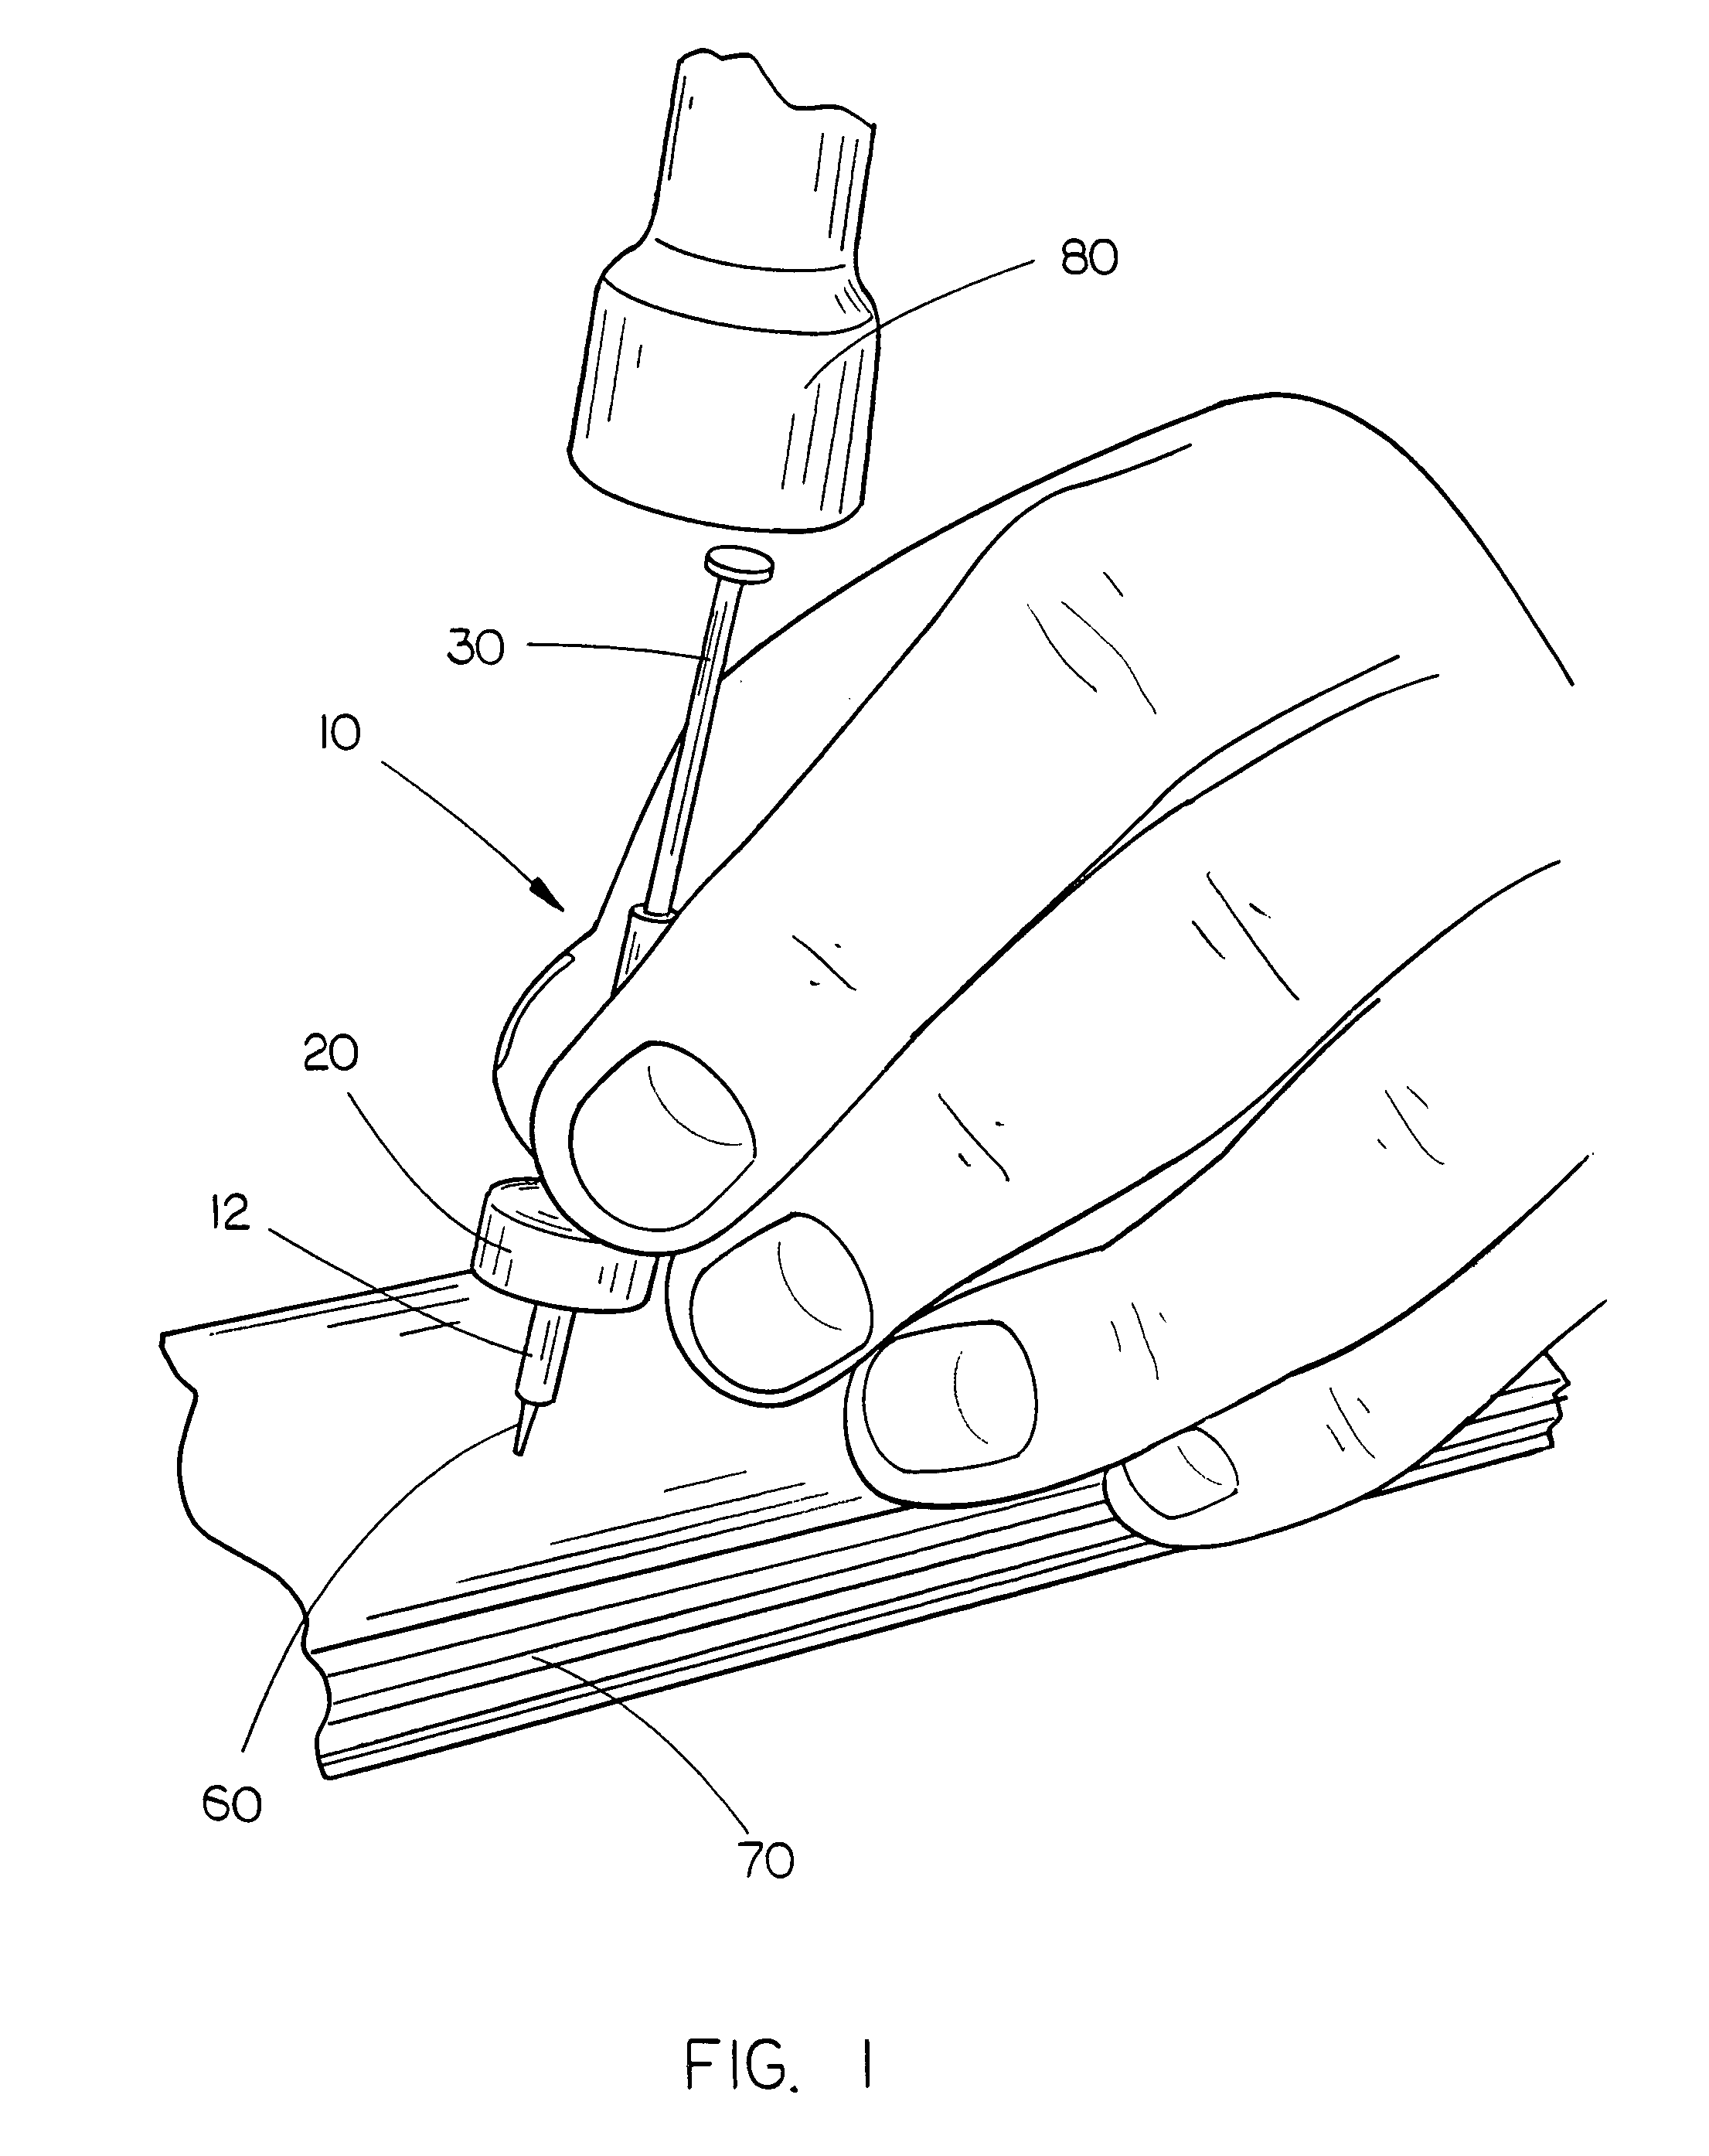 Nail holding and driving device